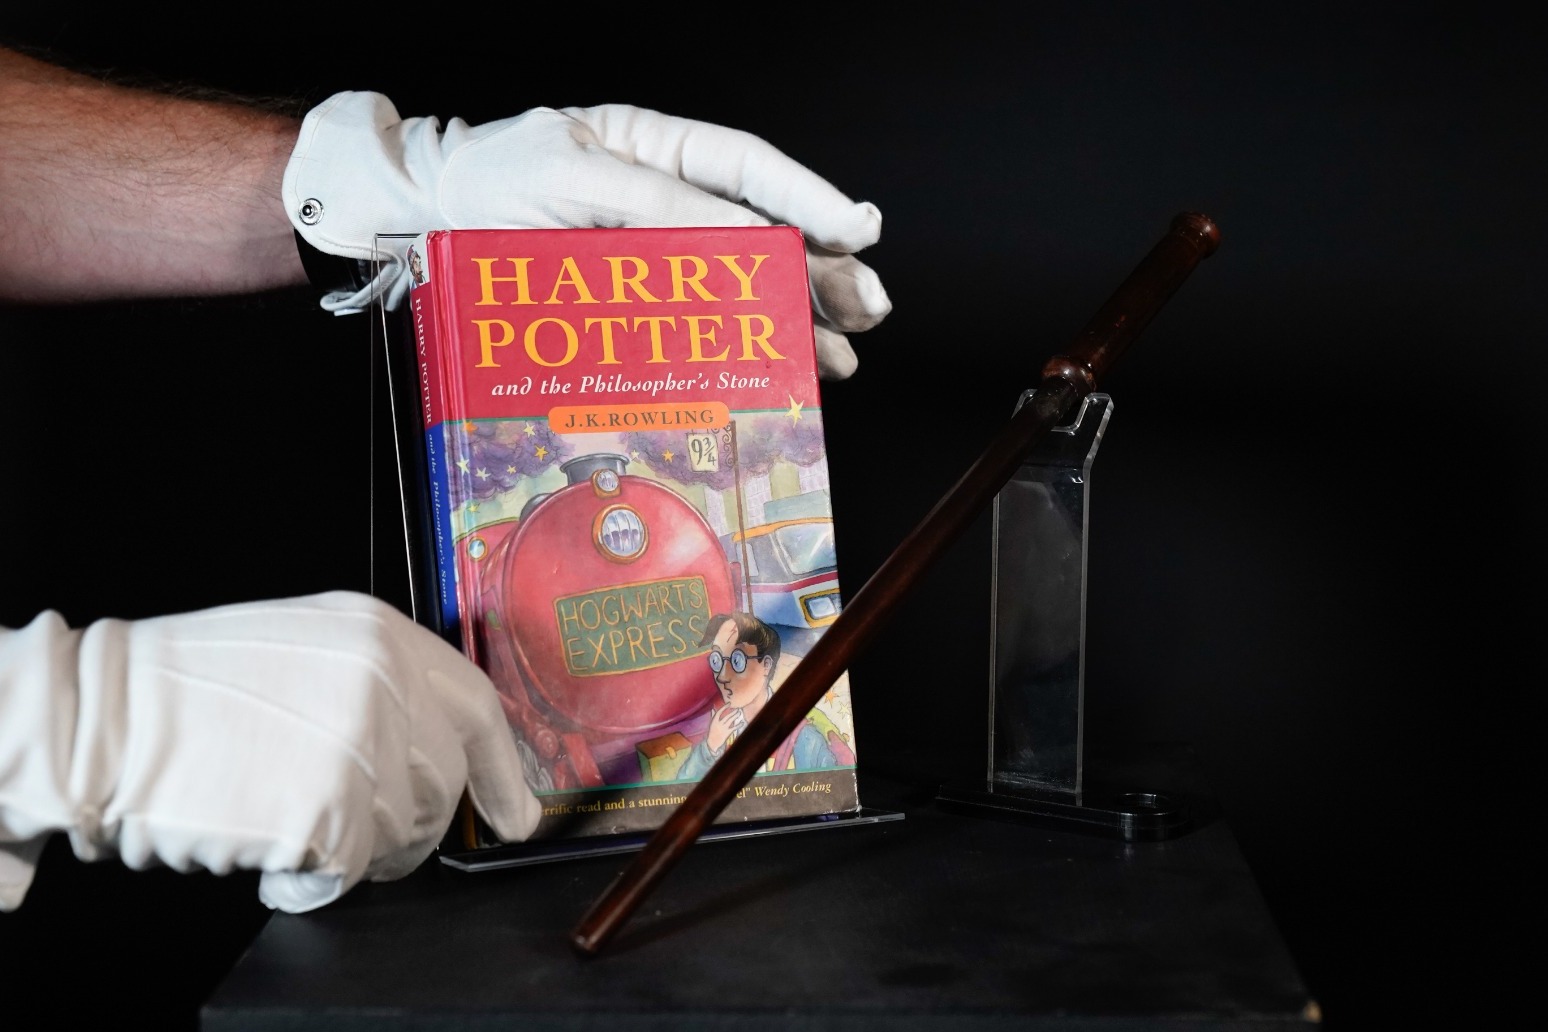 First edition hardback of Harry Potter to be sold for up to £150,000 at auction 